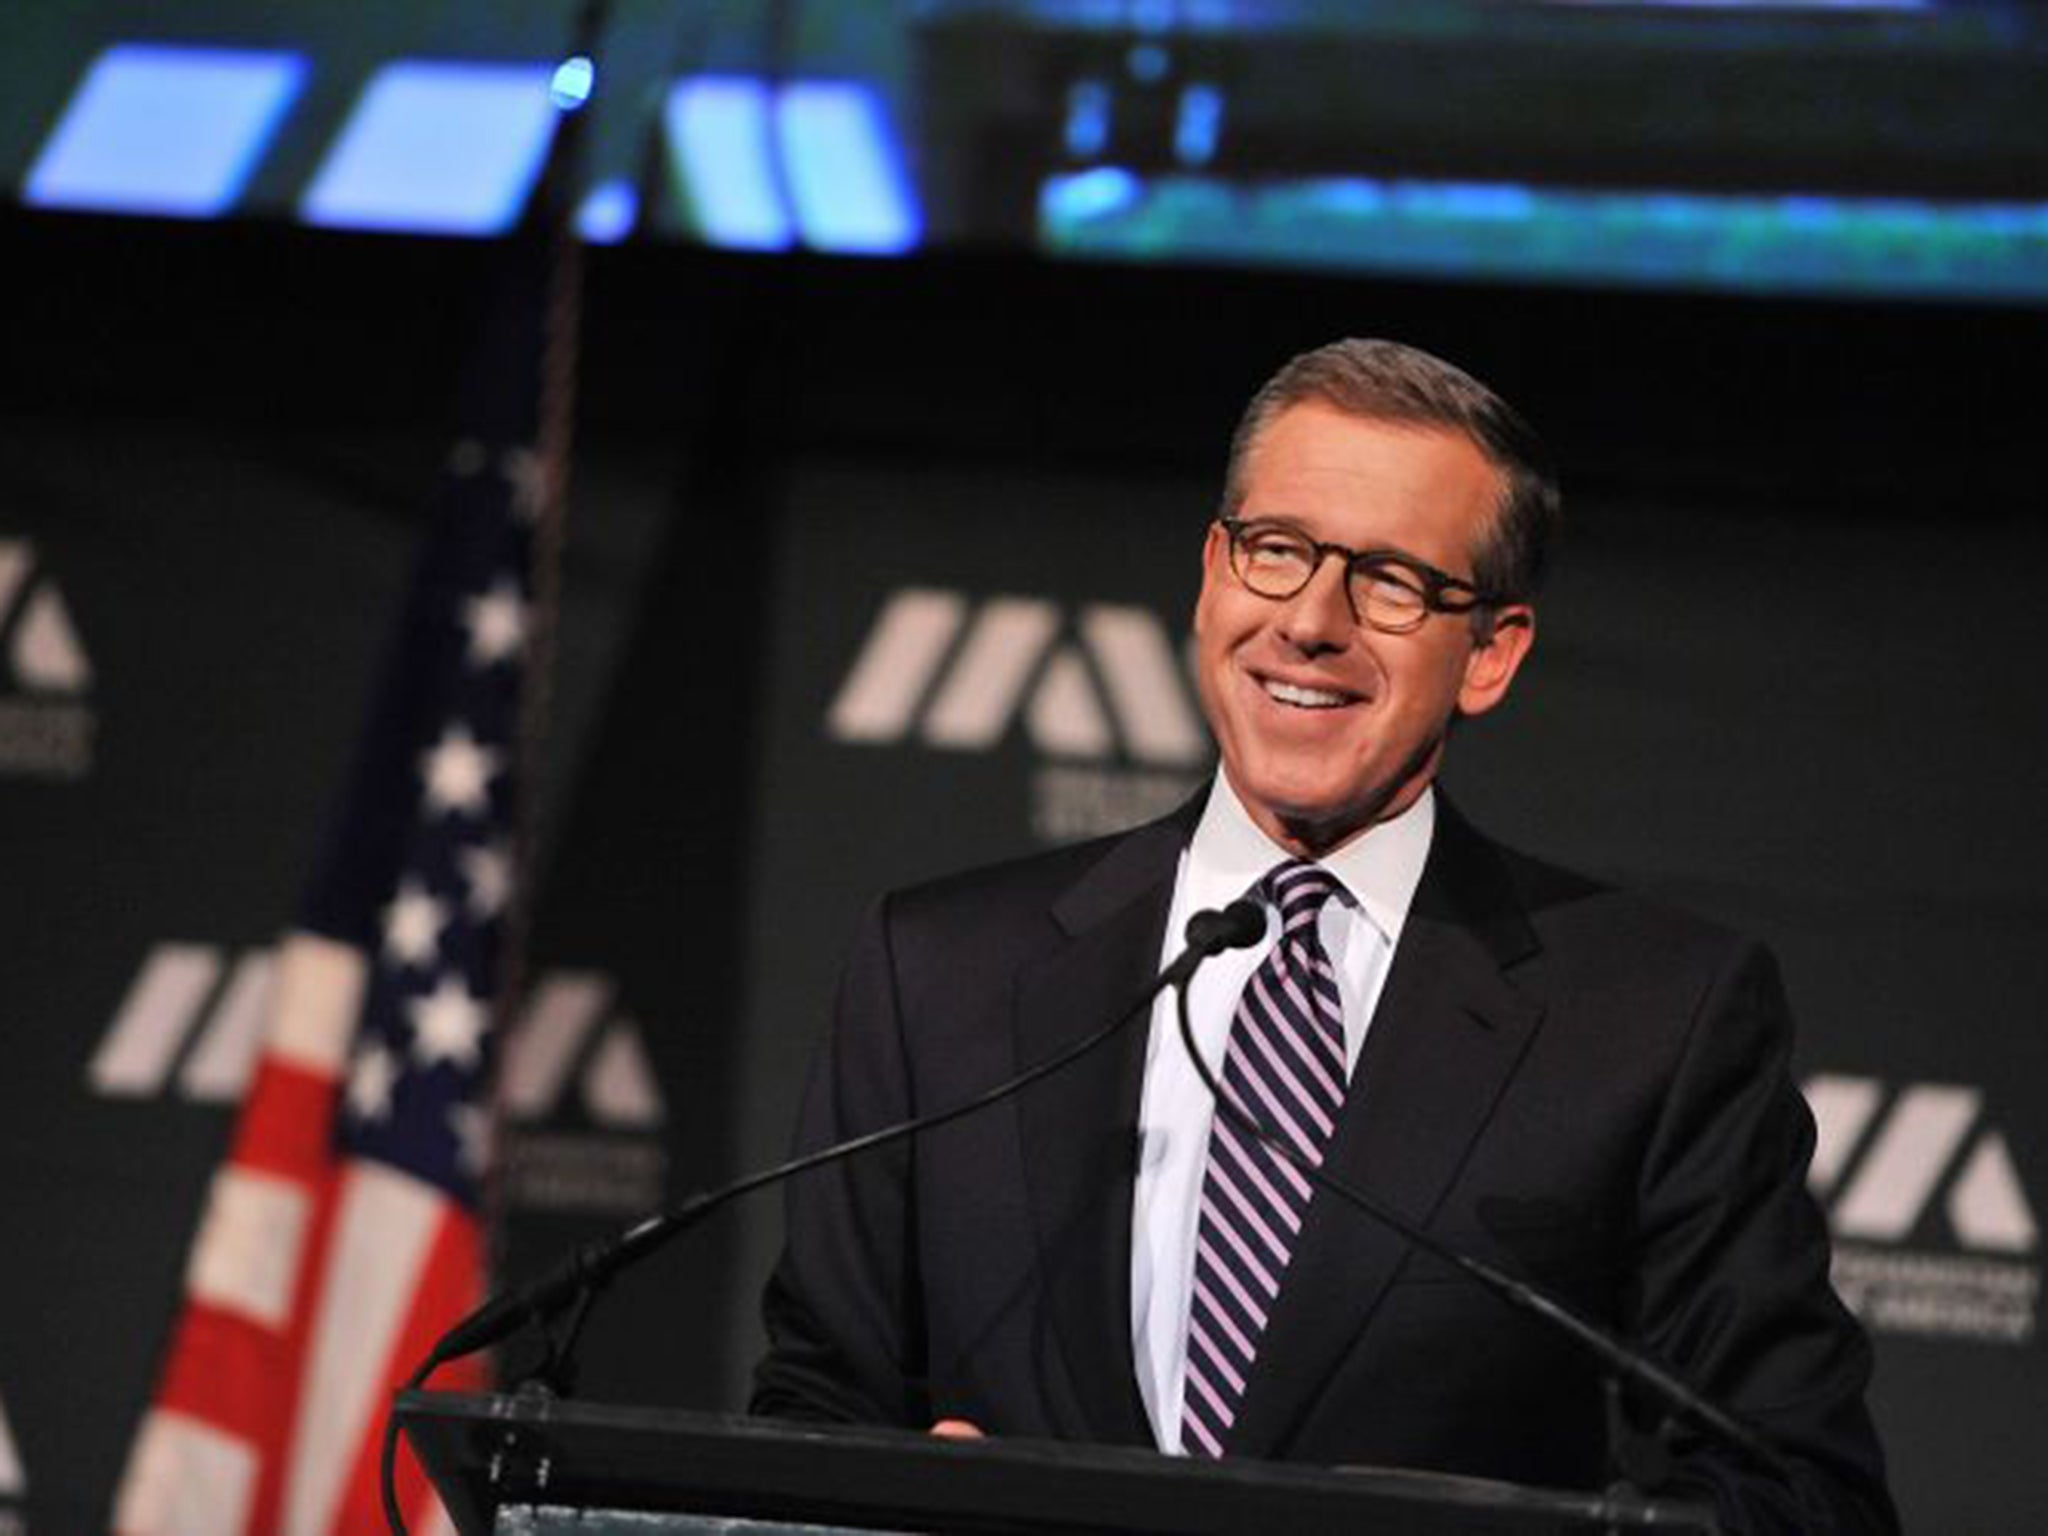 Brian Williams has been suspended for six months by NBC